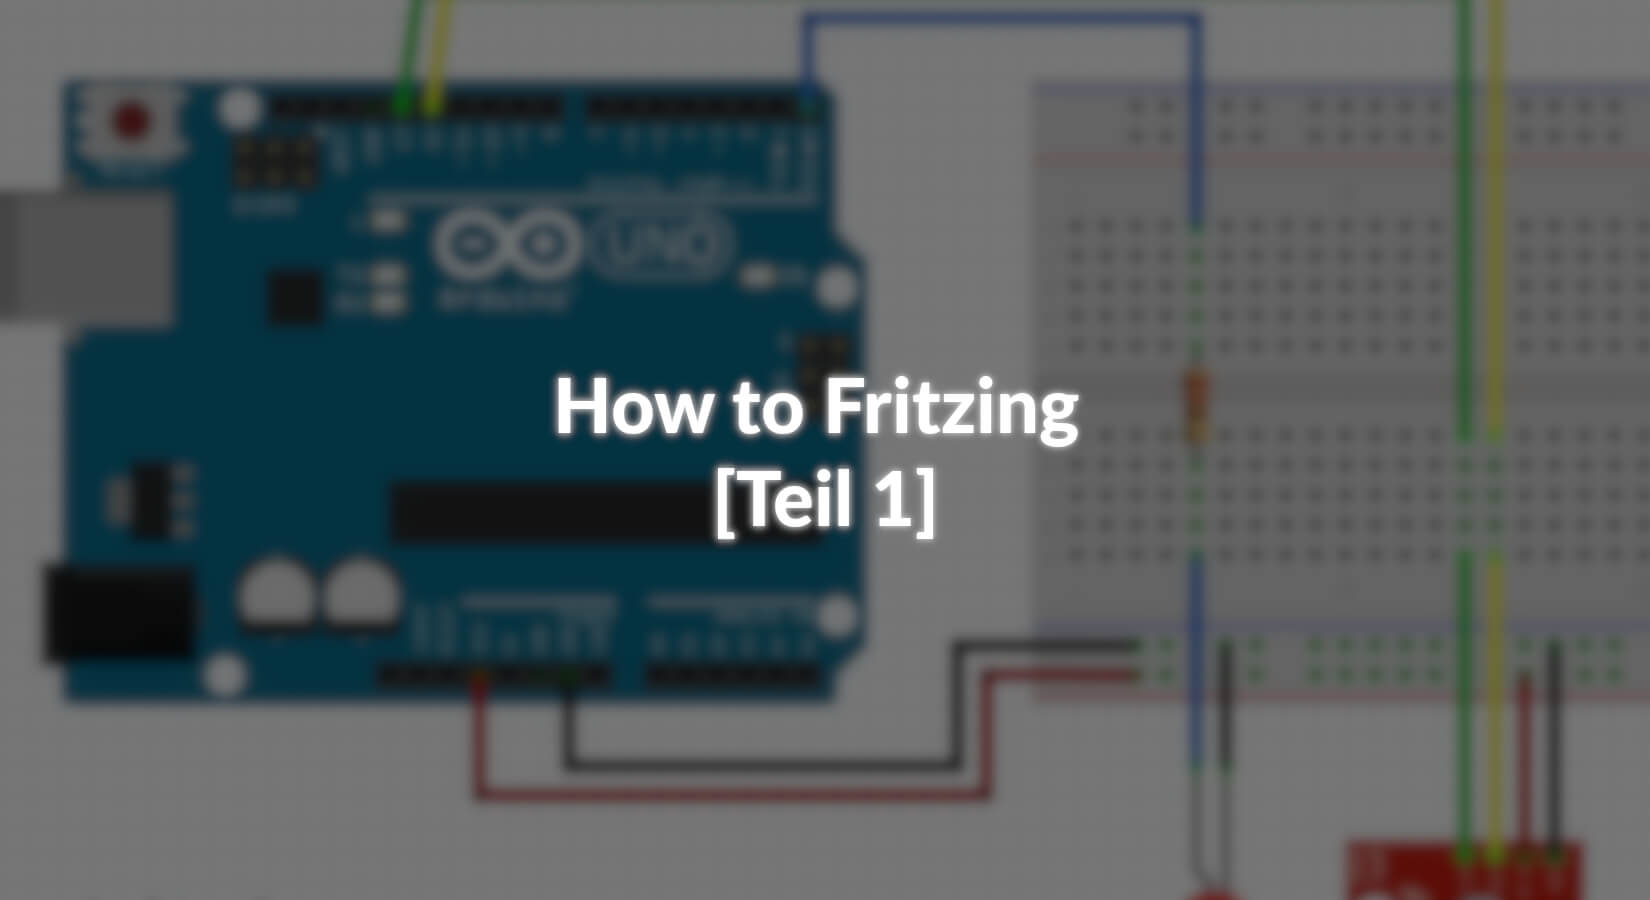 How to Fritzing - [Teil 1] - AZ-Delivery